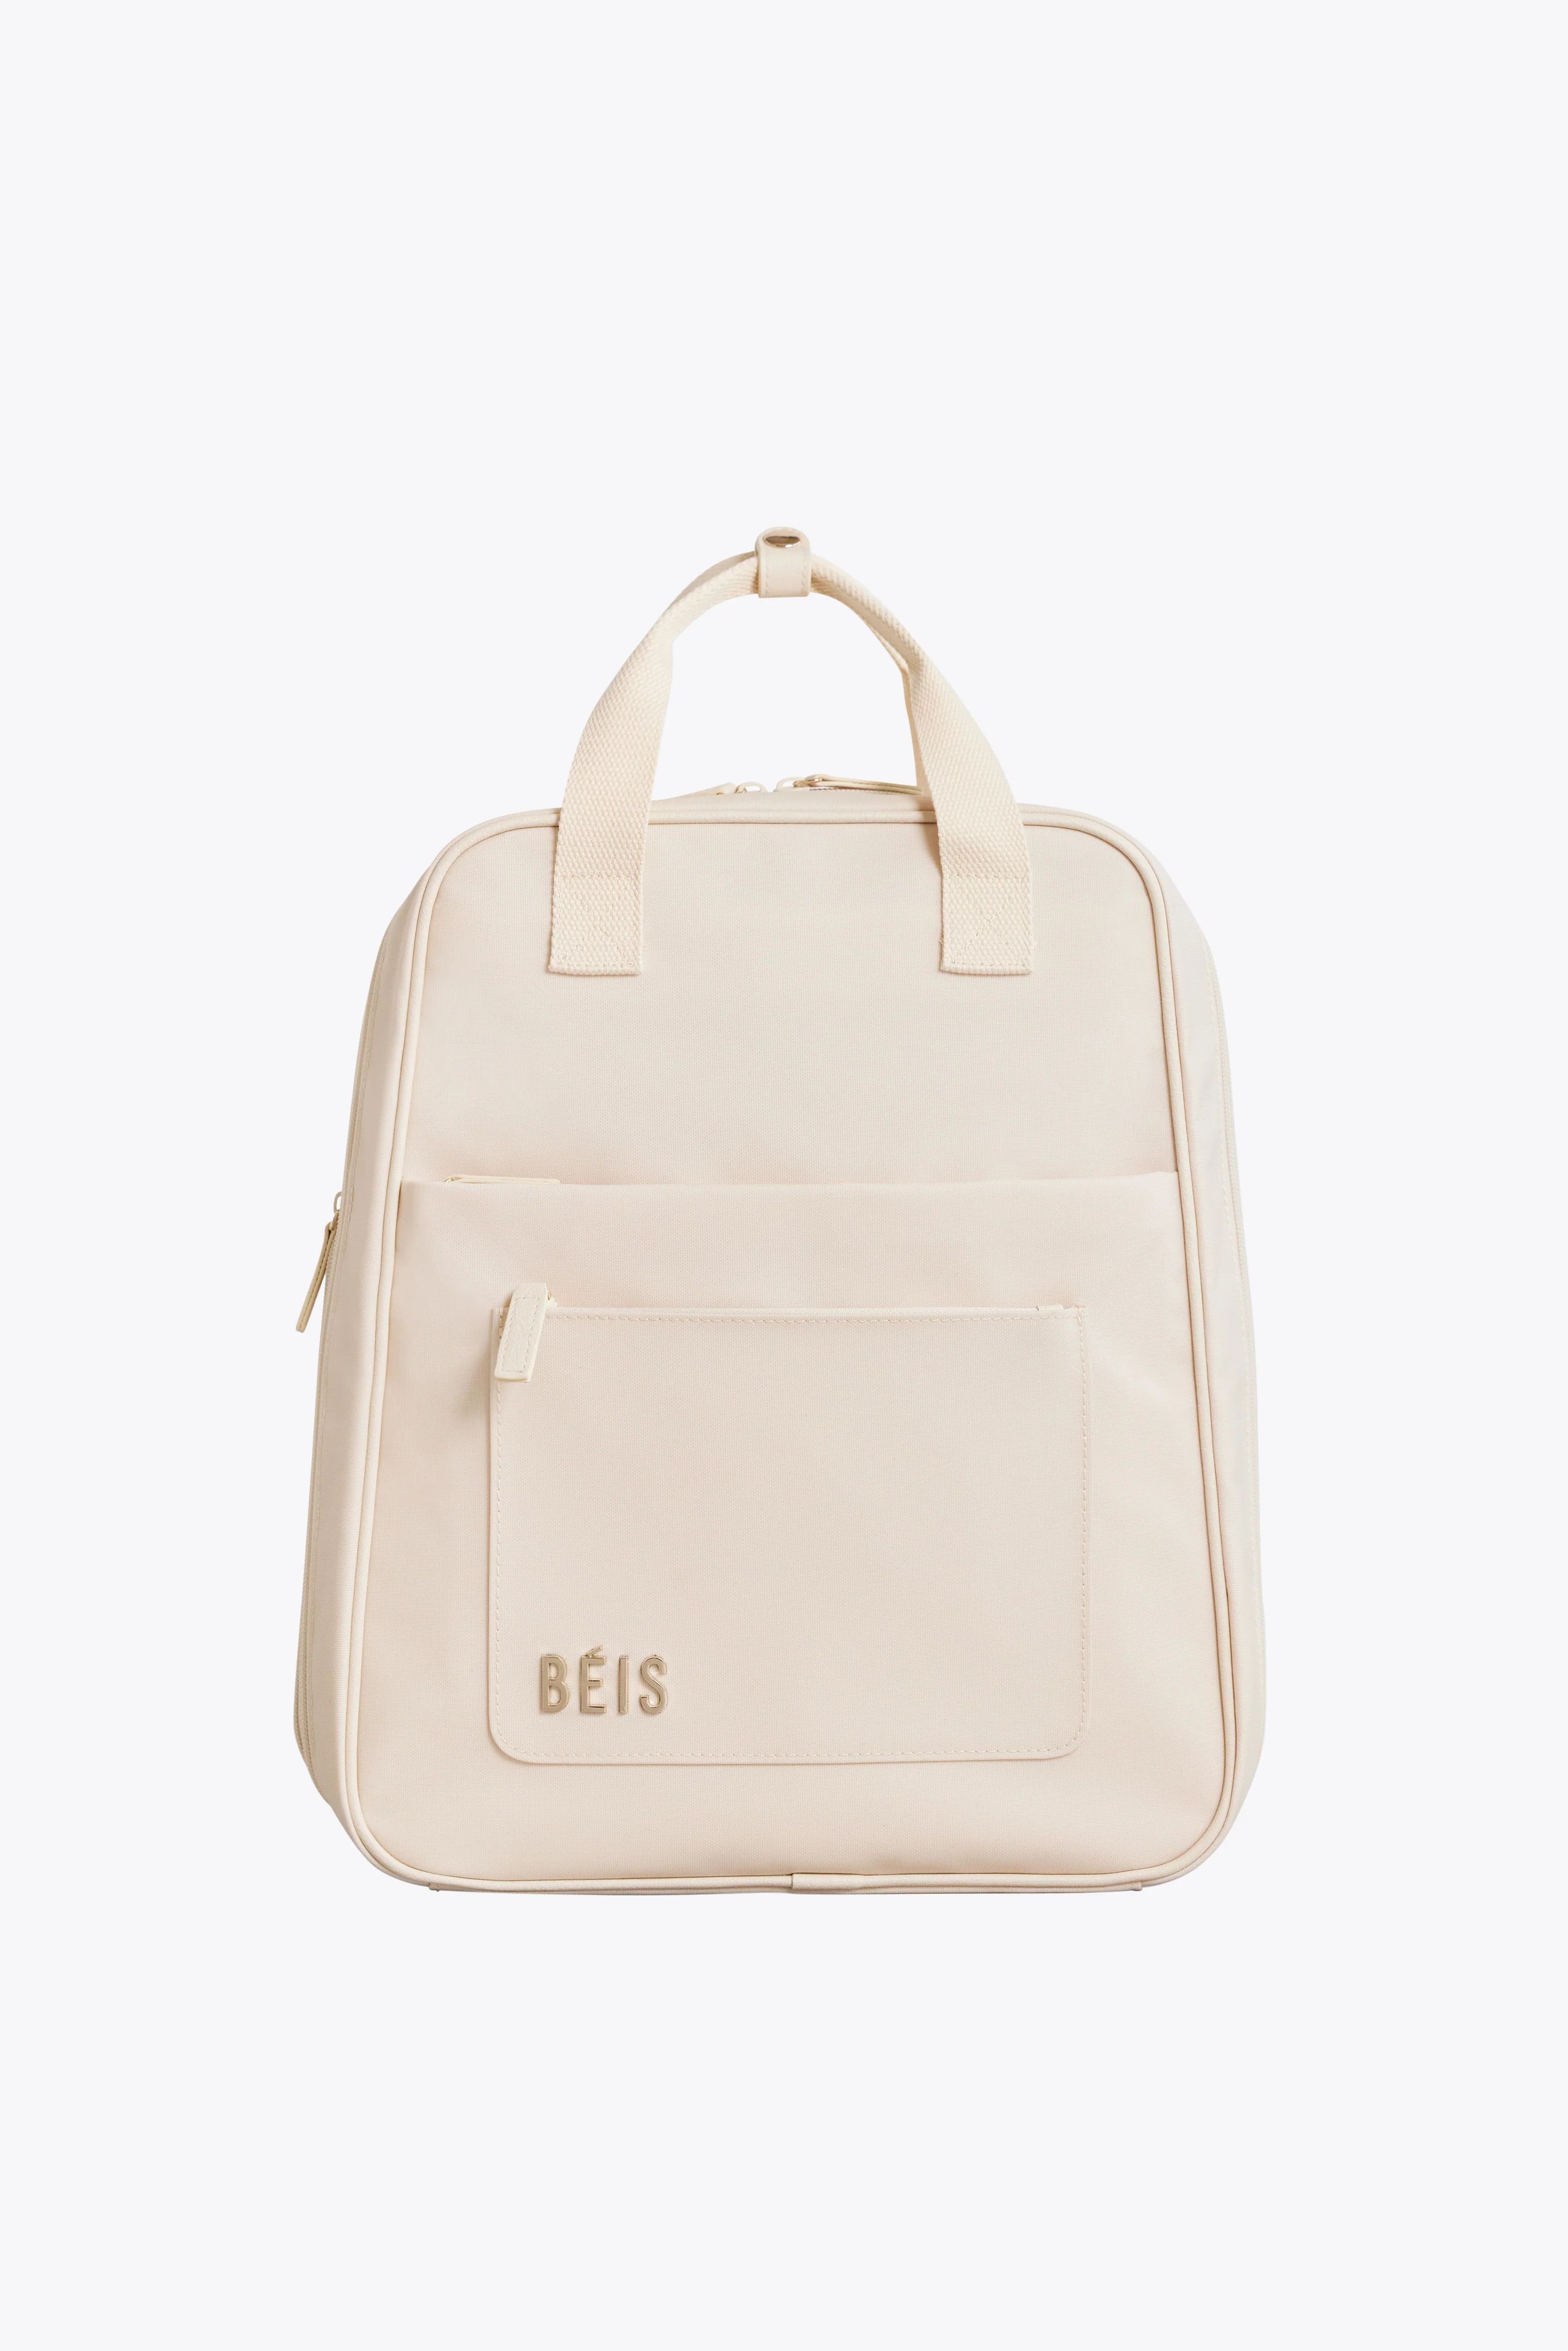 BÉIS 'The Expandable Backpack' in Beige - Expandable Travel Backpacks | BÉIS Travel